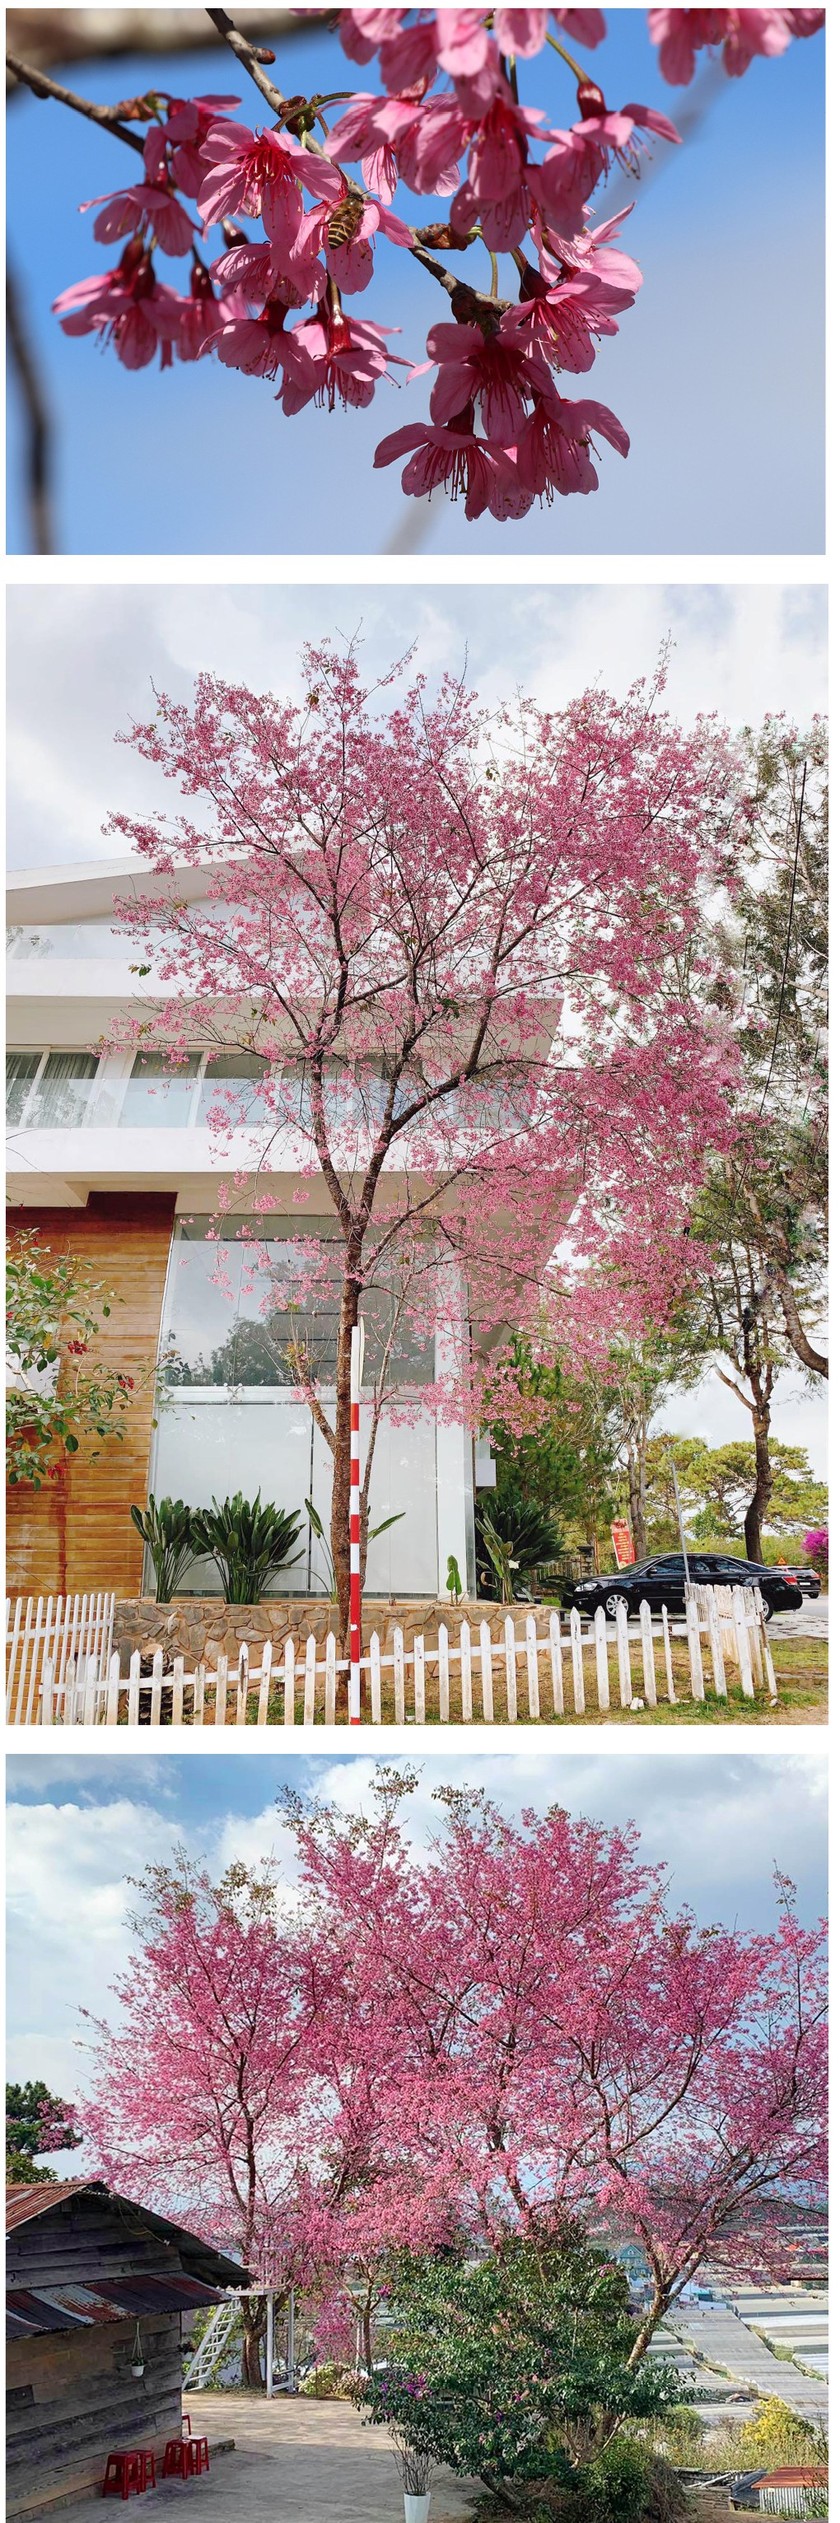 Da Lat turns a ravishing shade of pink with cherry blossoms in full bloom ảnh 8